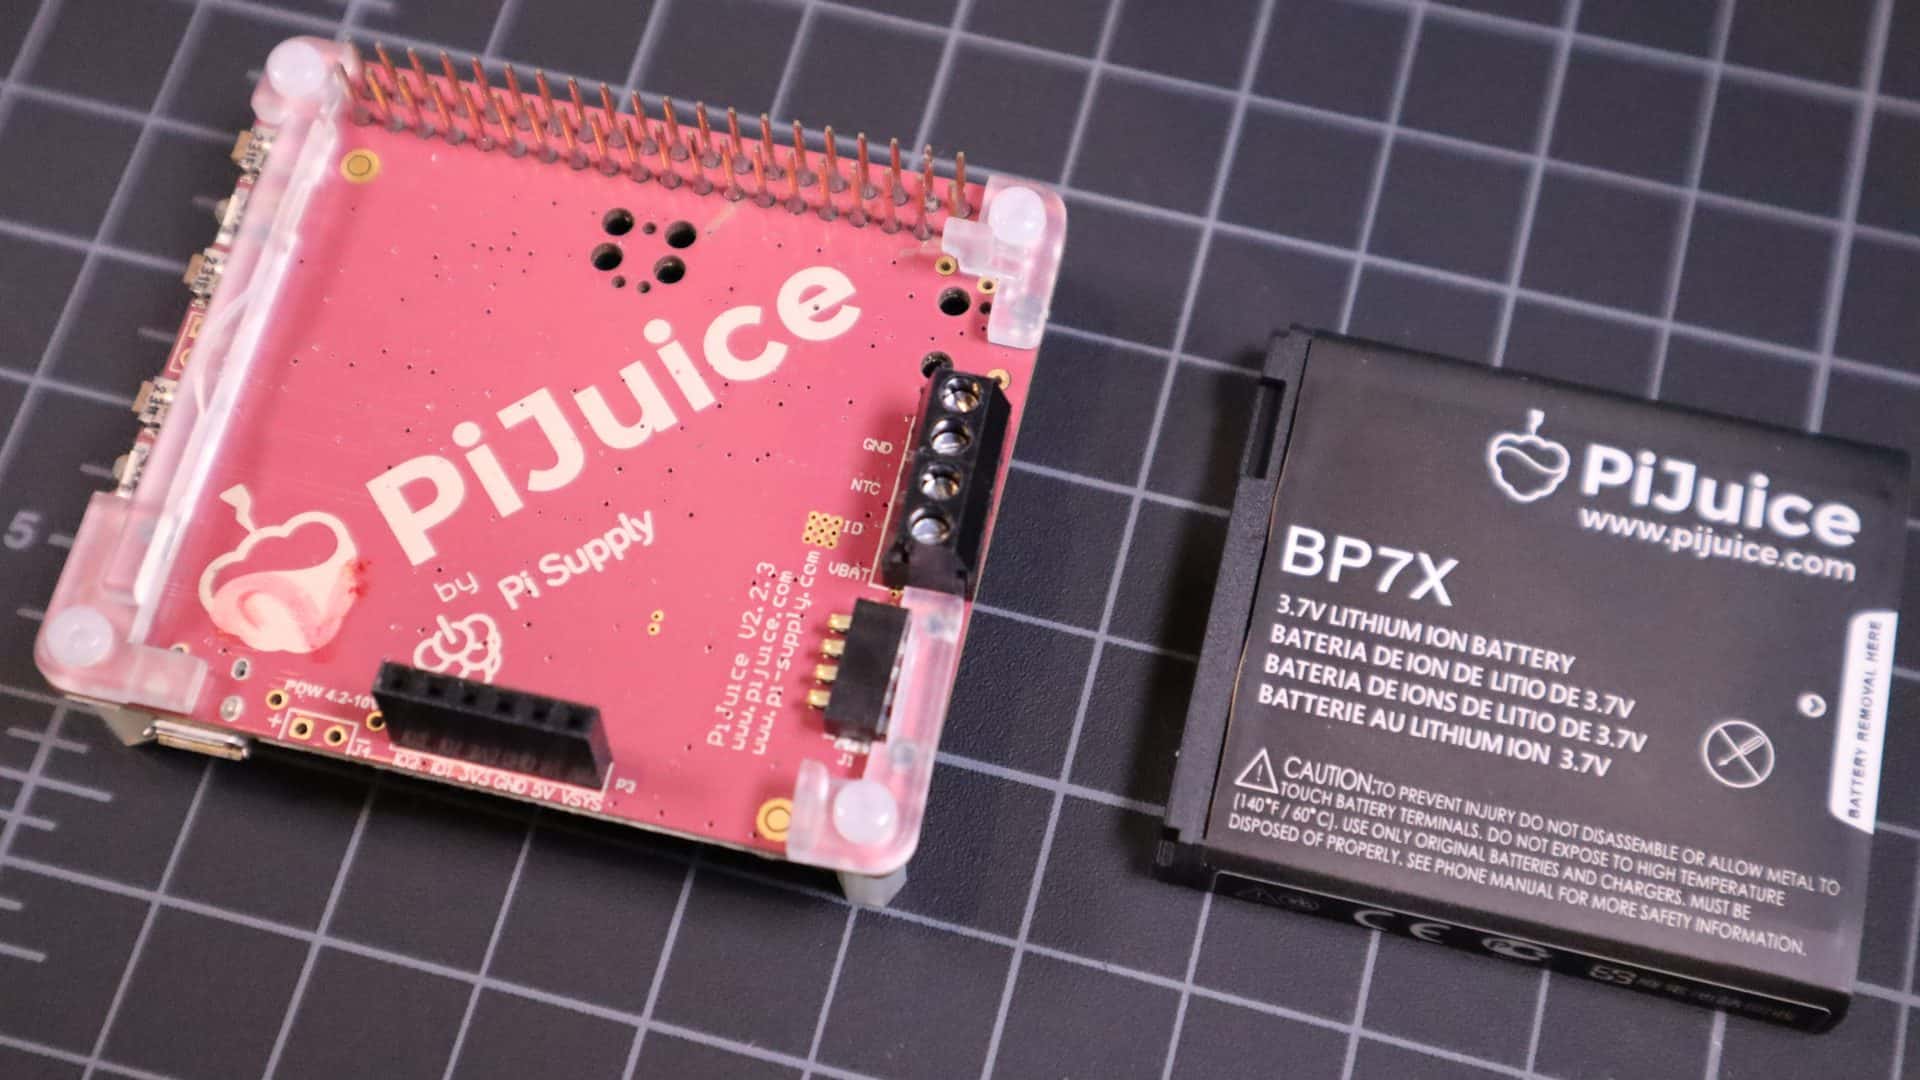 PiJuice - The Best Pi Battery Pack - The Geek Pub